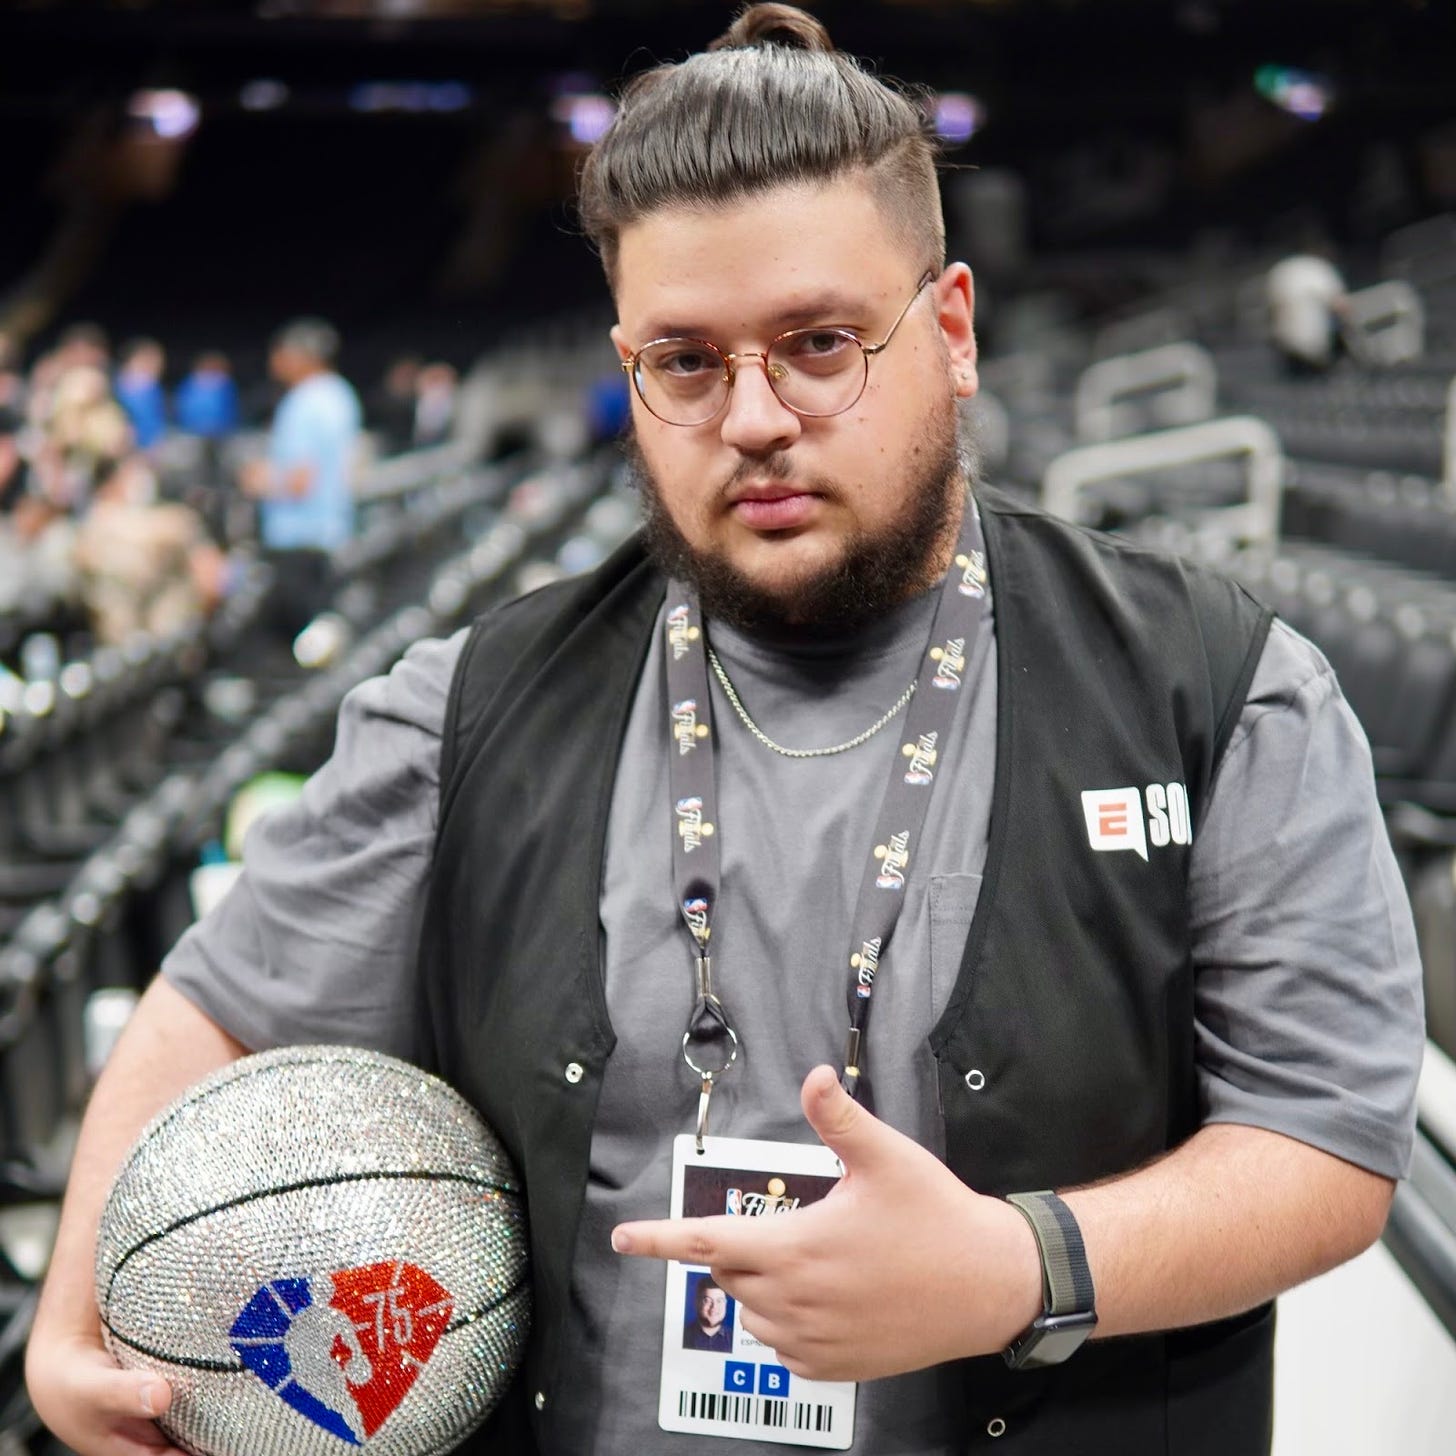 Photo of Moh Kloub, Senior Social Media Specialist at ESPN, standing in a stadium with a diamond encrusted basketball.